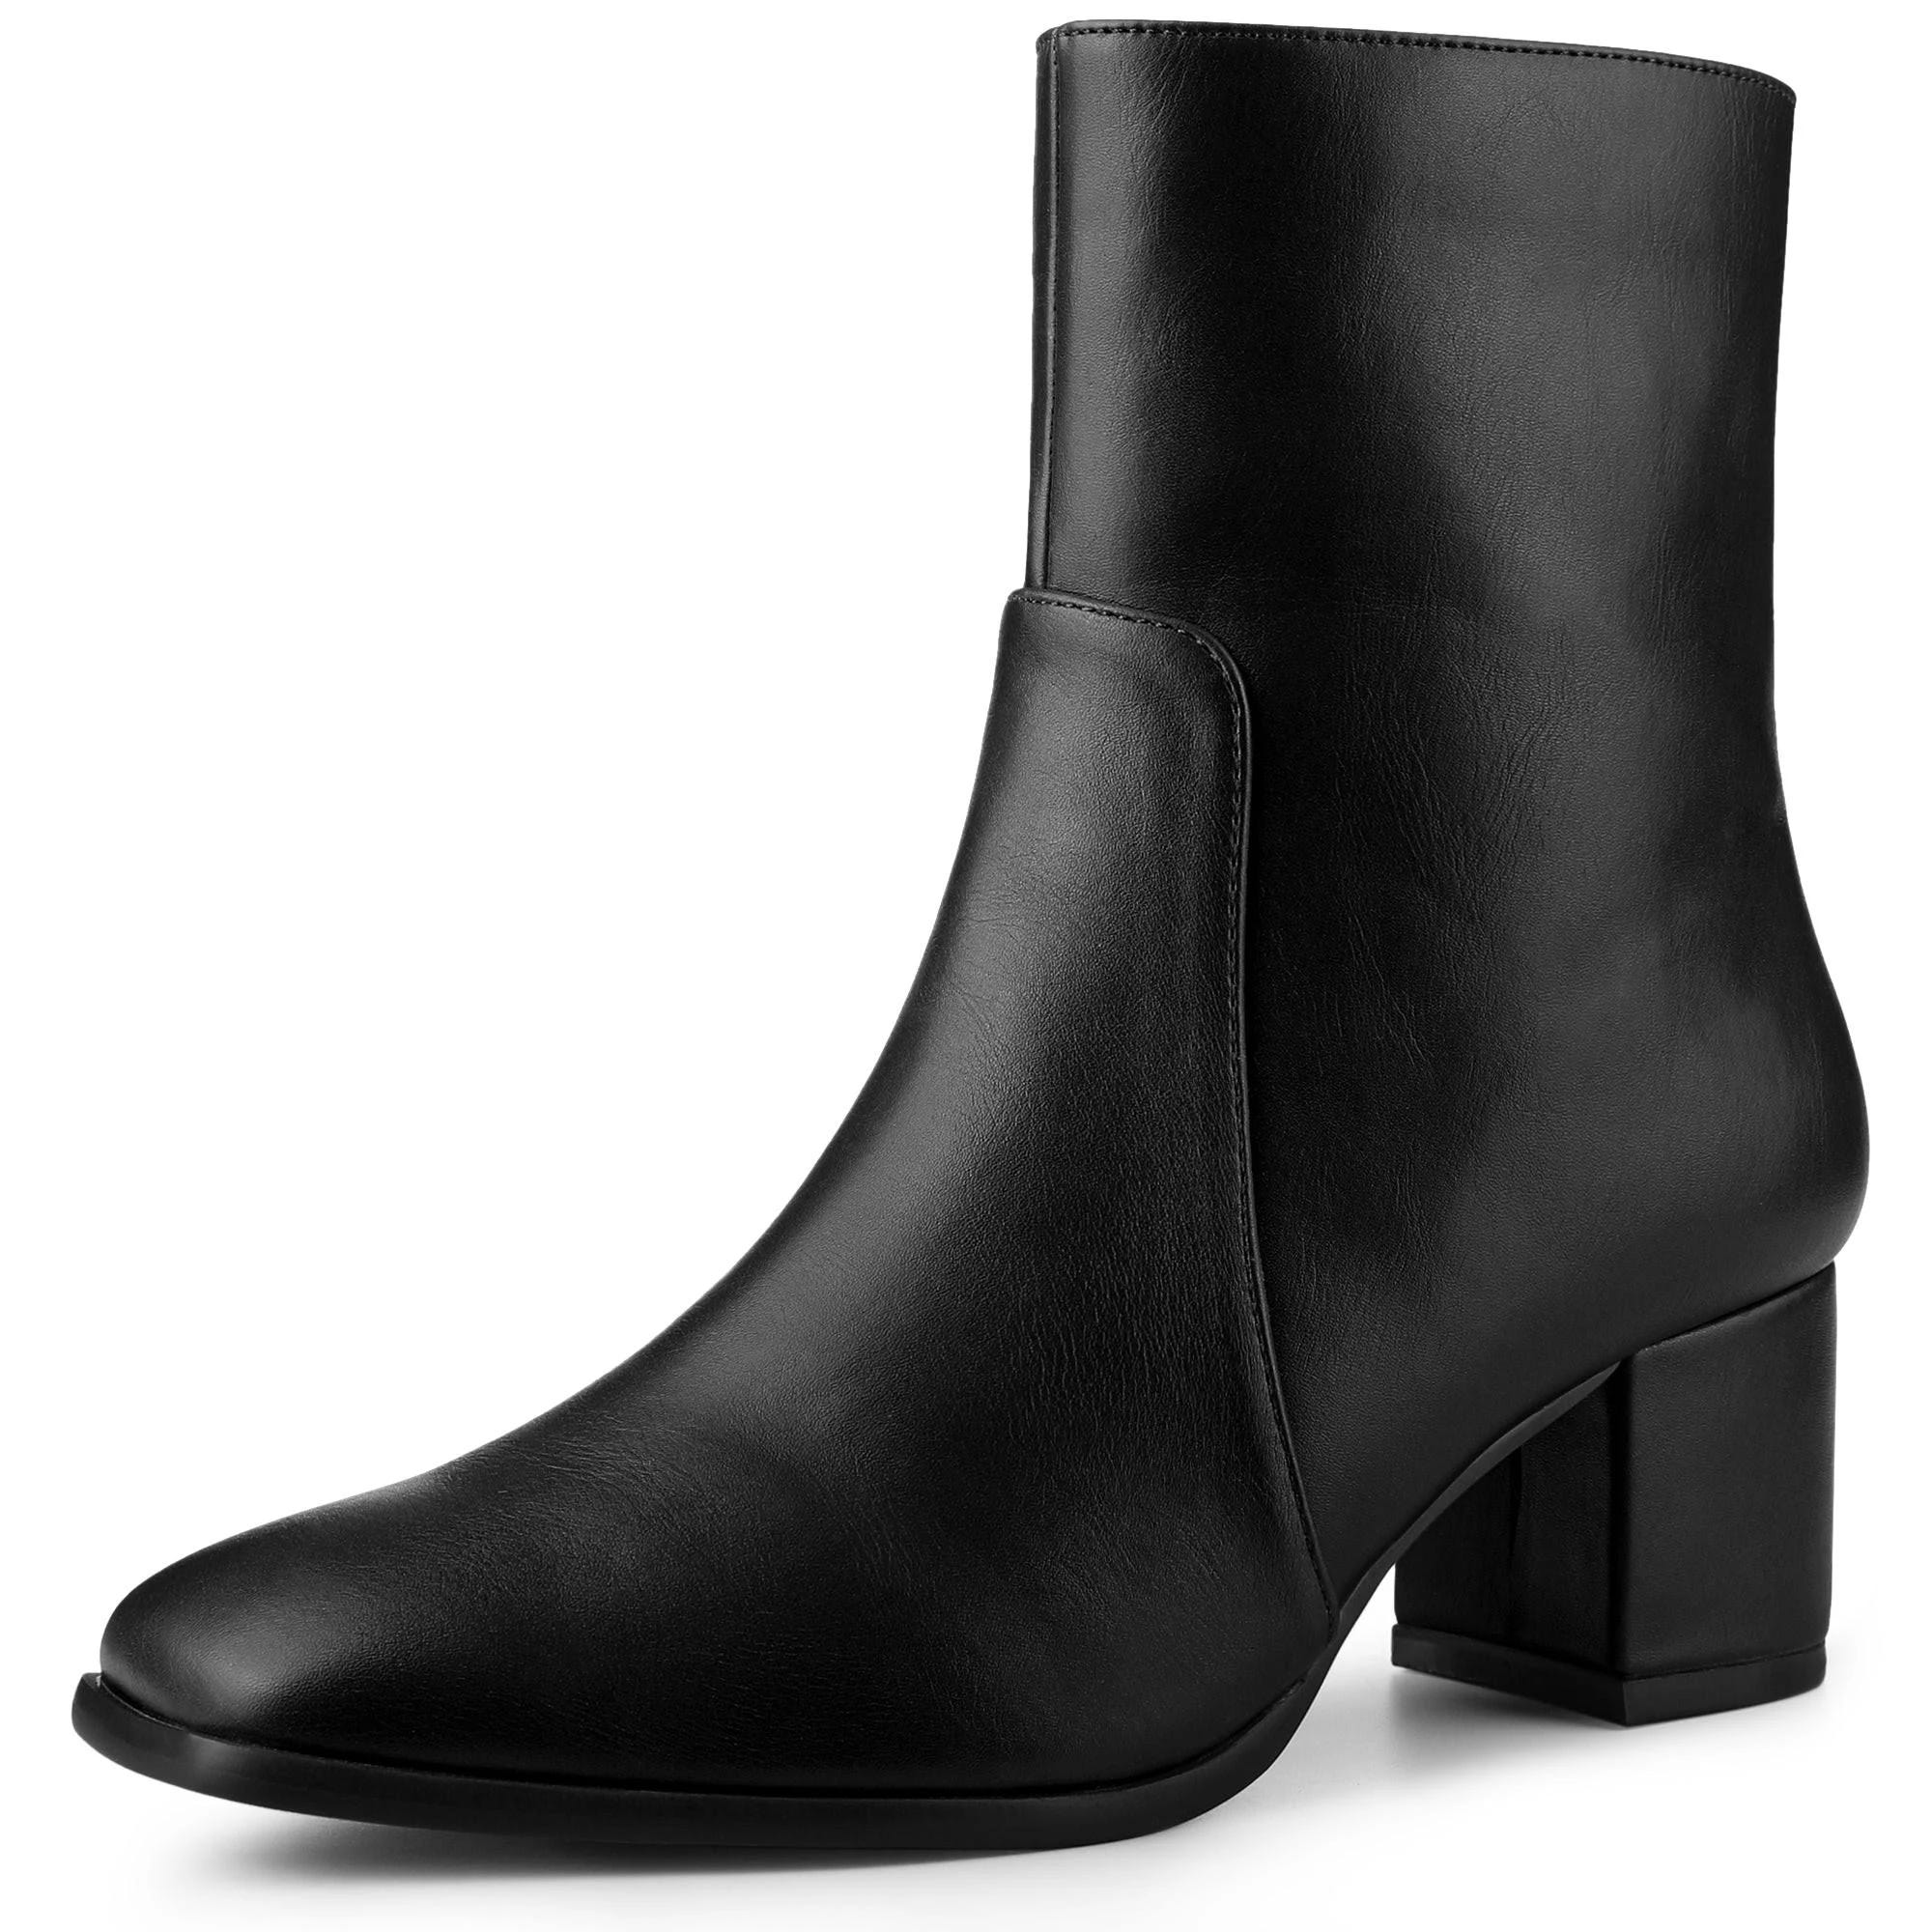 Square Toe Block Heel PU Leather Ankle Boots with Side Zip | Image